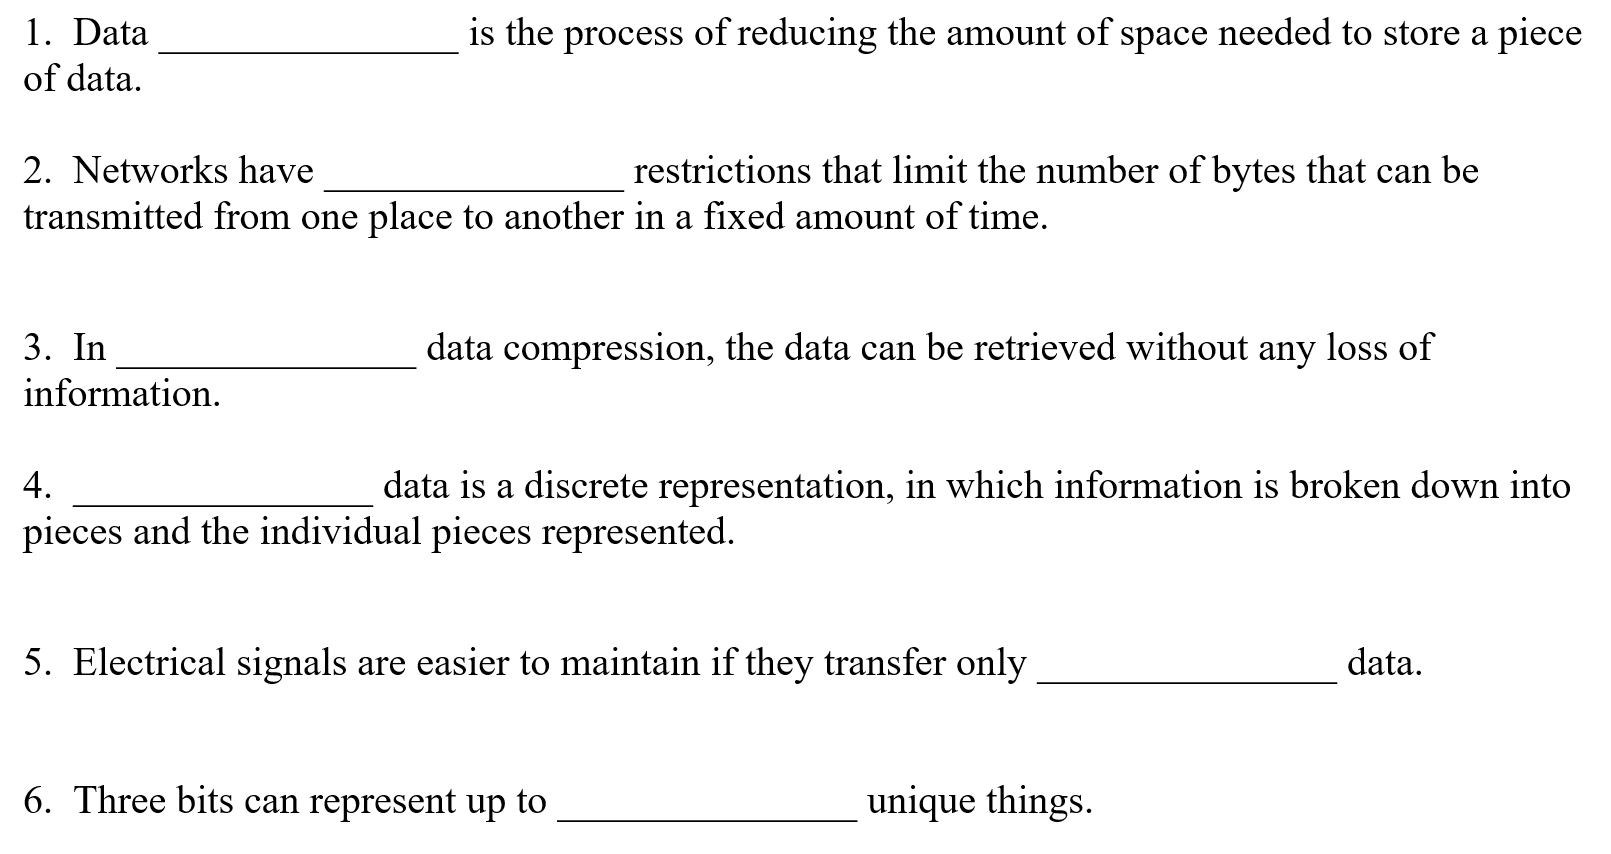 1. Data
the process of reducing the amount of space needed to store a piece
of data.
2. Networks have
restrictions that limit the number of bytes that can be
transmitted from one place to another in a fixed amount of time.
3. In
data compression, the data can be retrieved without any loss of
information.
